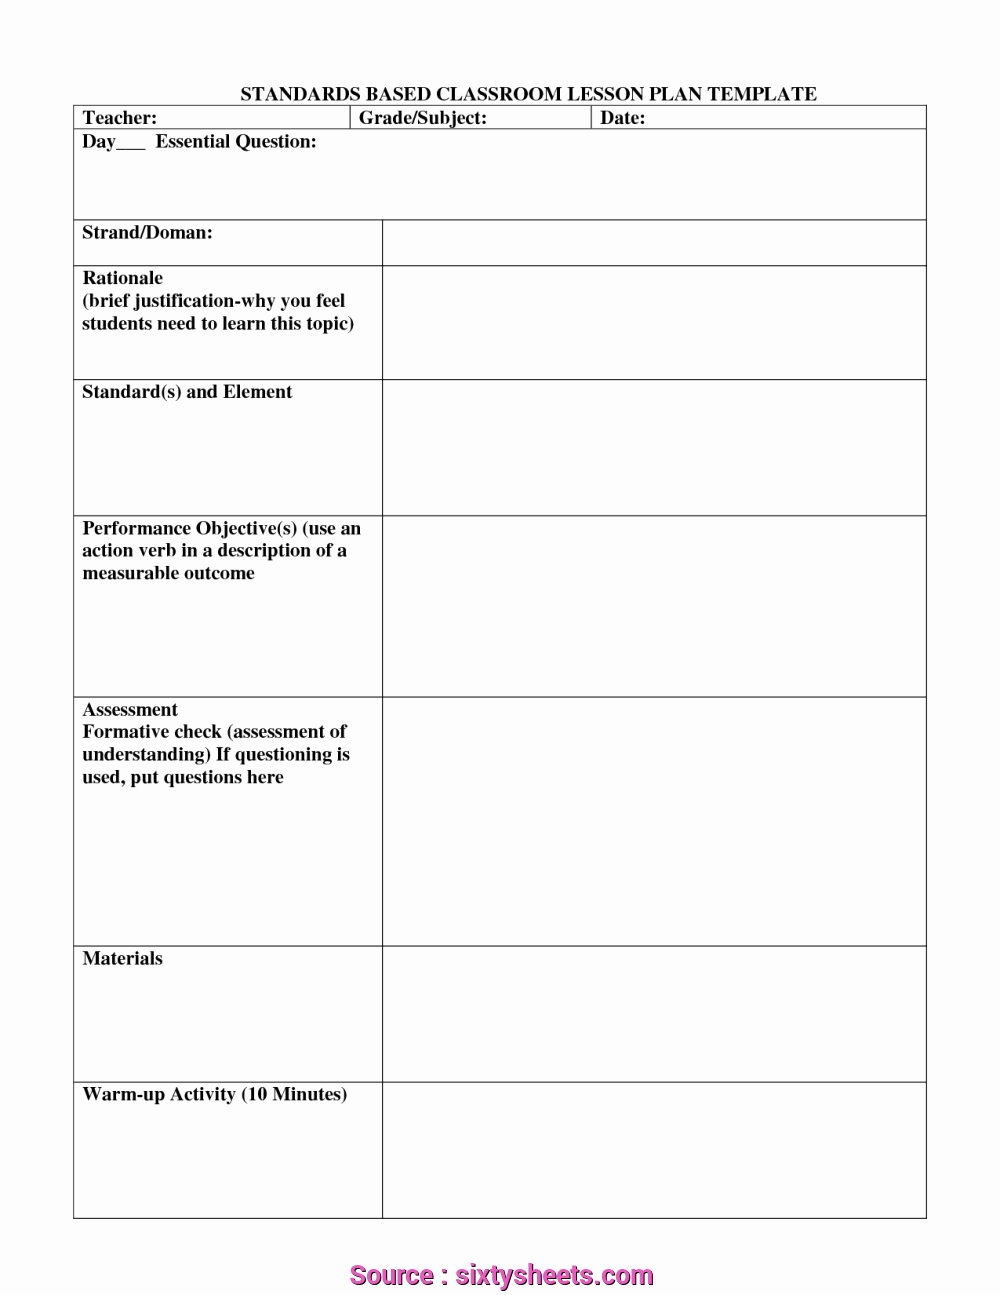 Standards Based Lesson Plan Template Best Of 4 Fantastic Printable Lesson Plan Template with Standards Ehlschlaeger